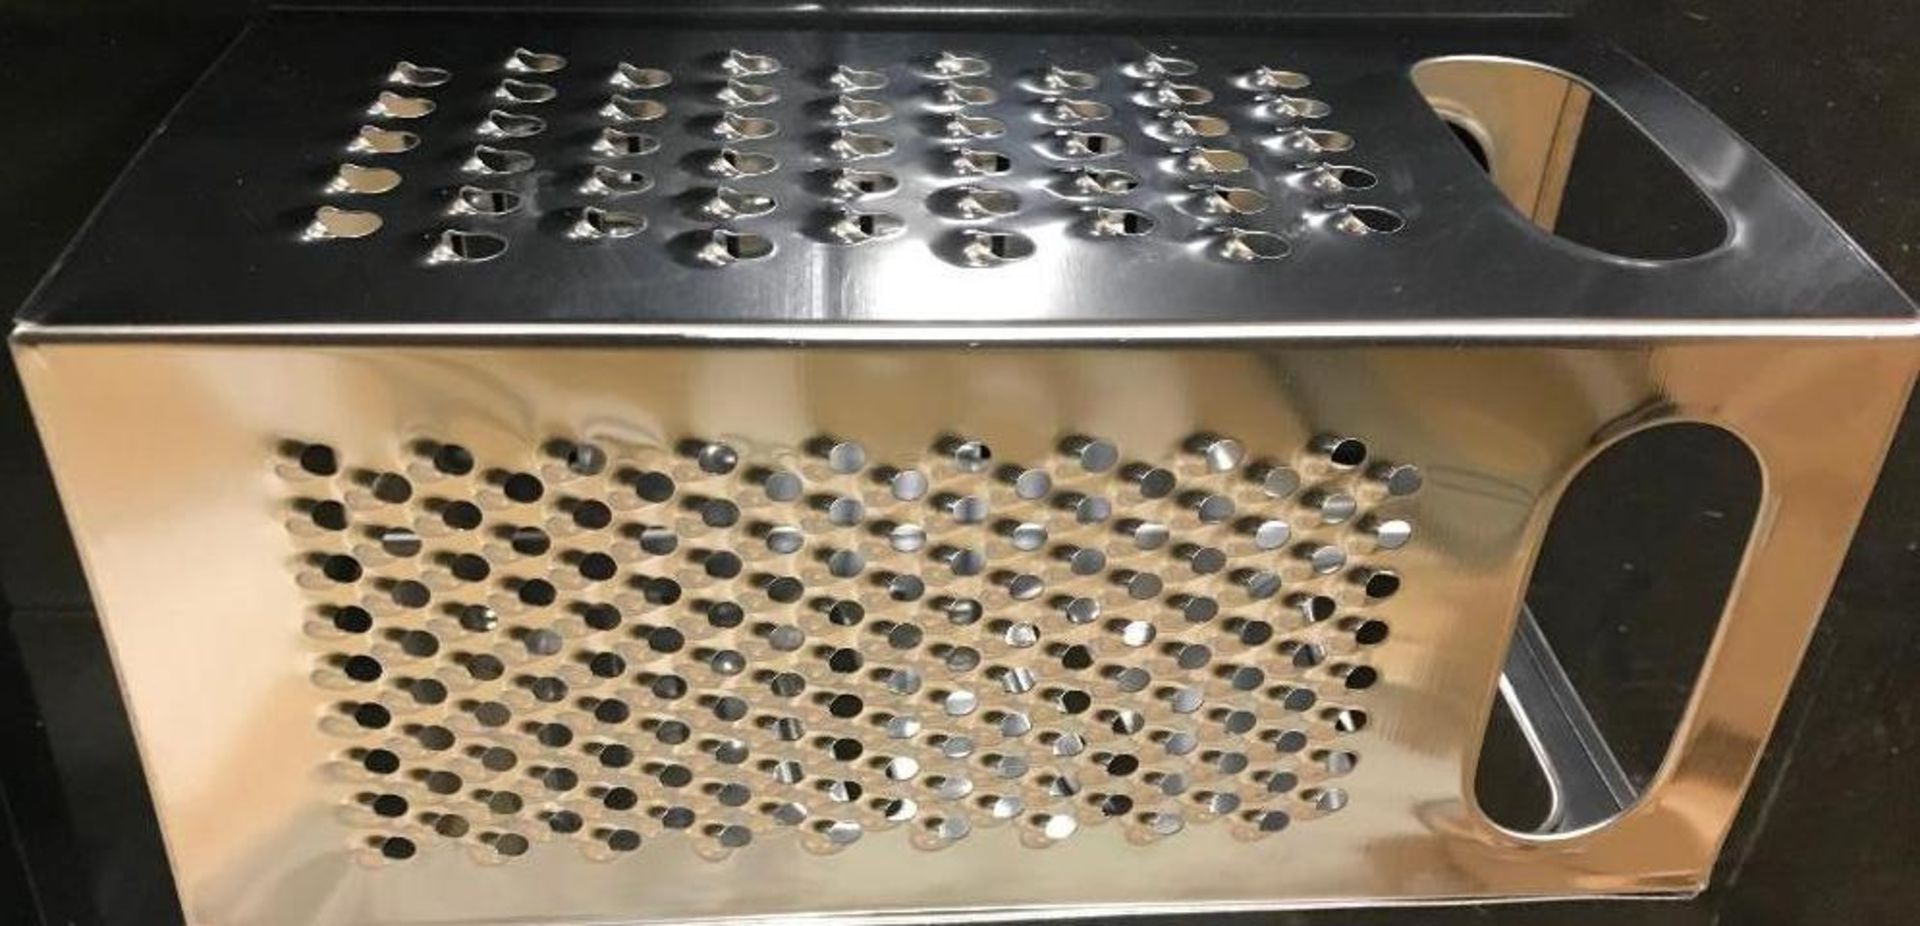 UPDATE INTERNATIONAL FOUR SIDED STAINLESS GRATER, GR-449 - NEW - Image 3 of 4